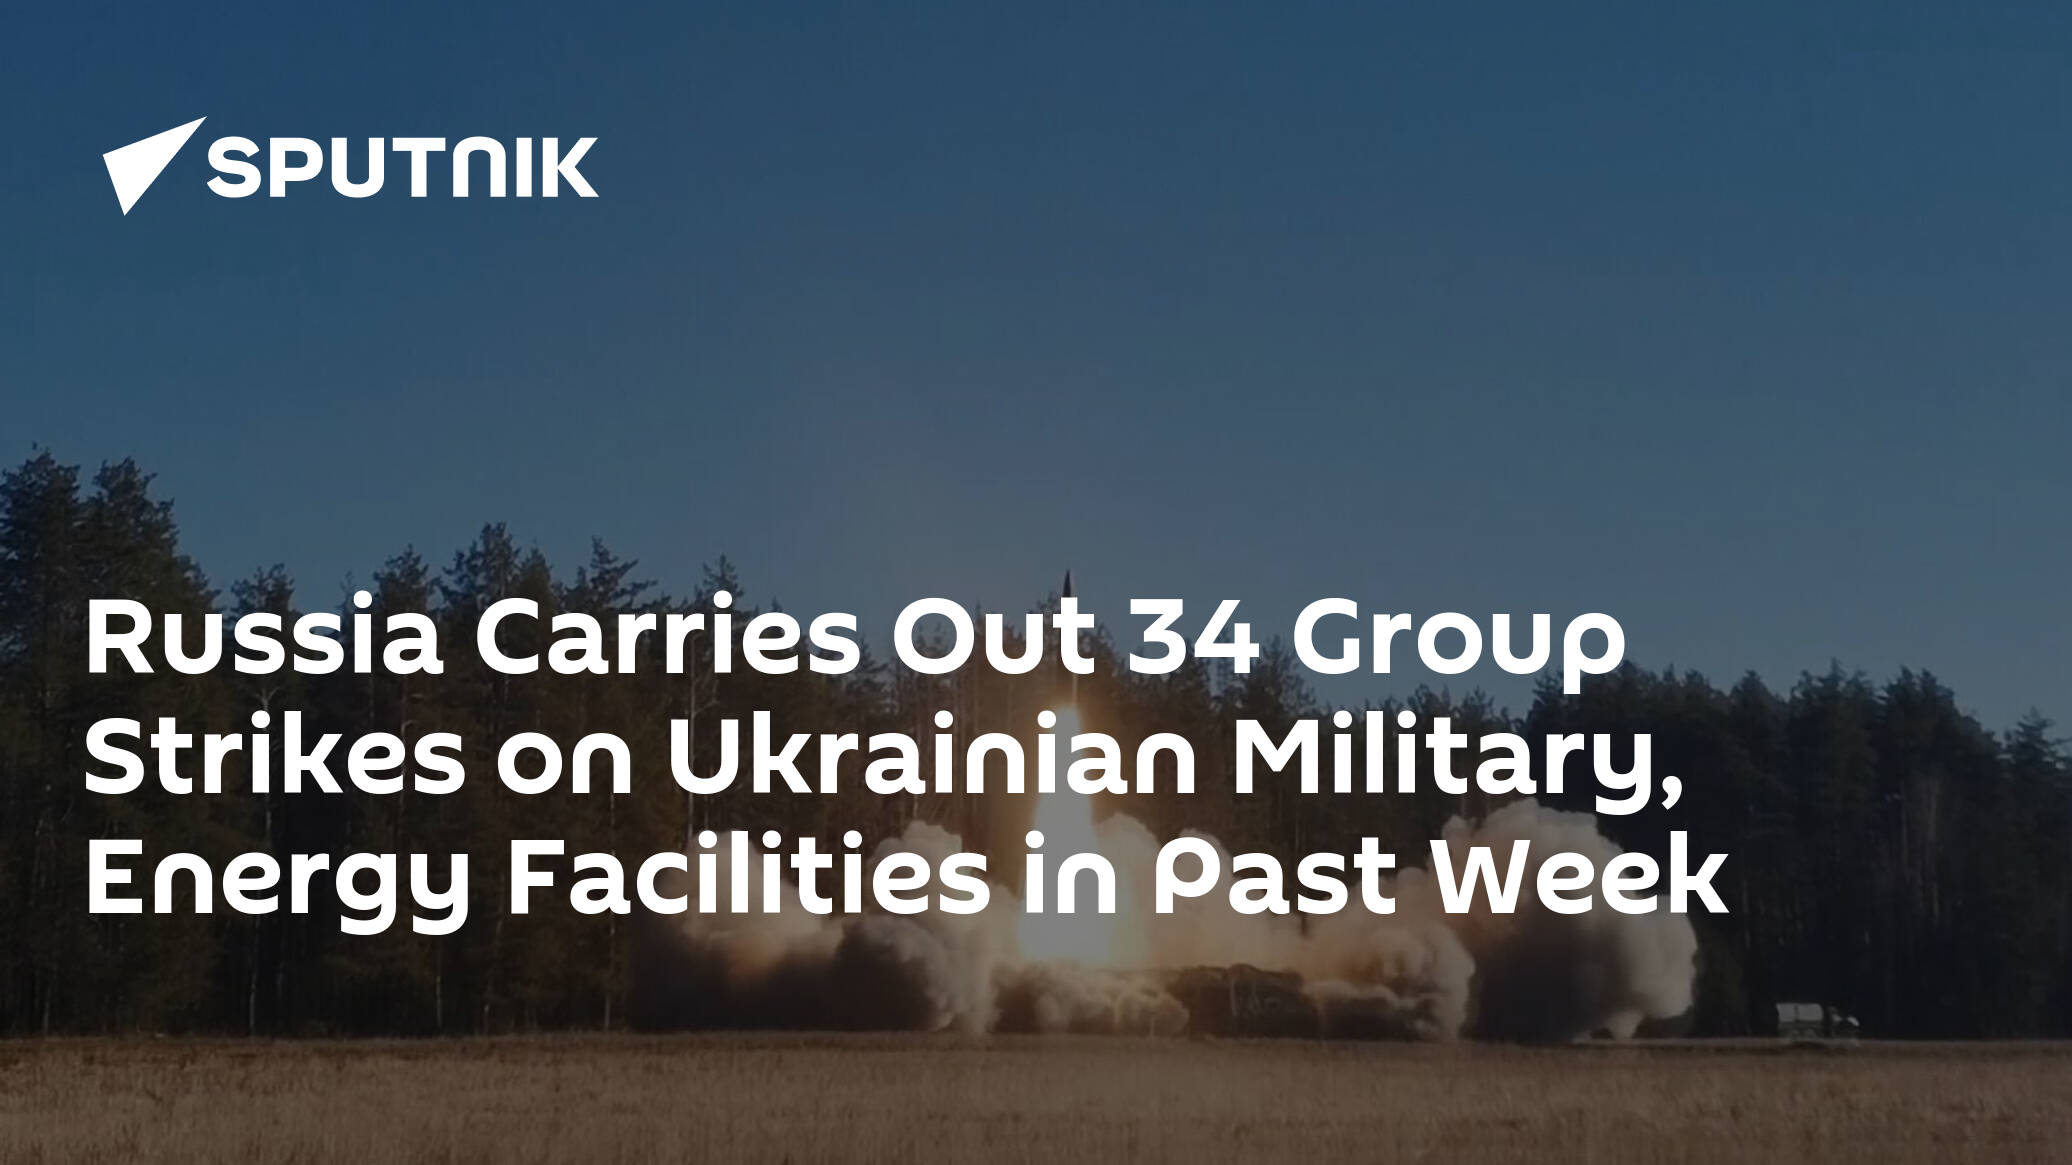 Russia Carries Out 34 Group Strikes on Ukrainian Military, Energy Facilities in Past Week